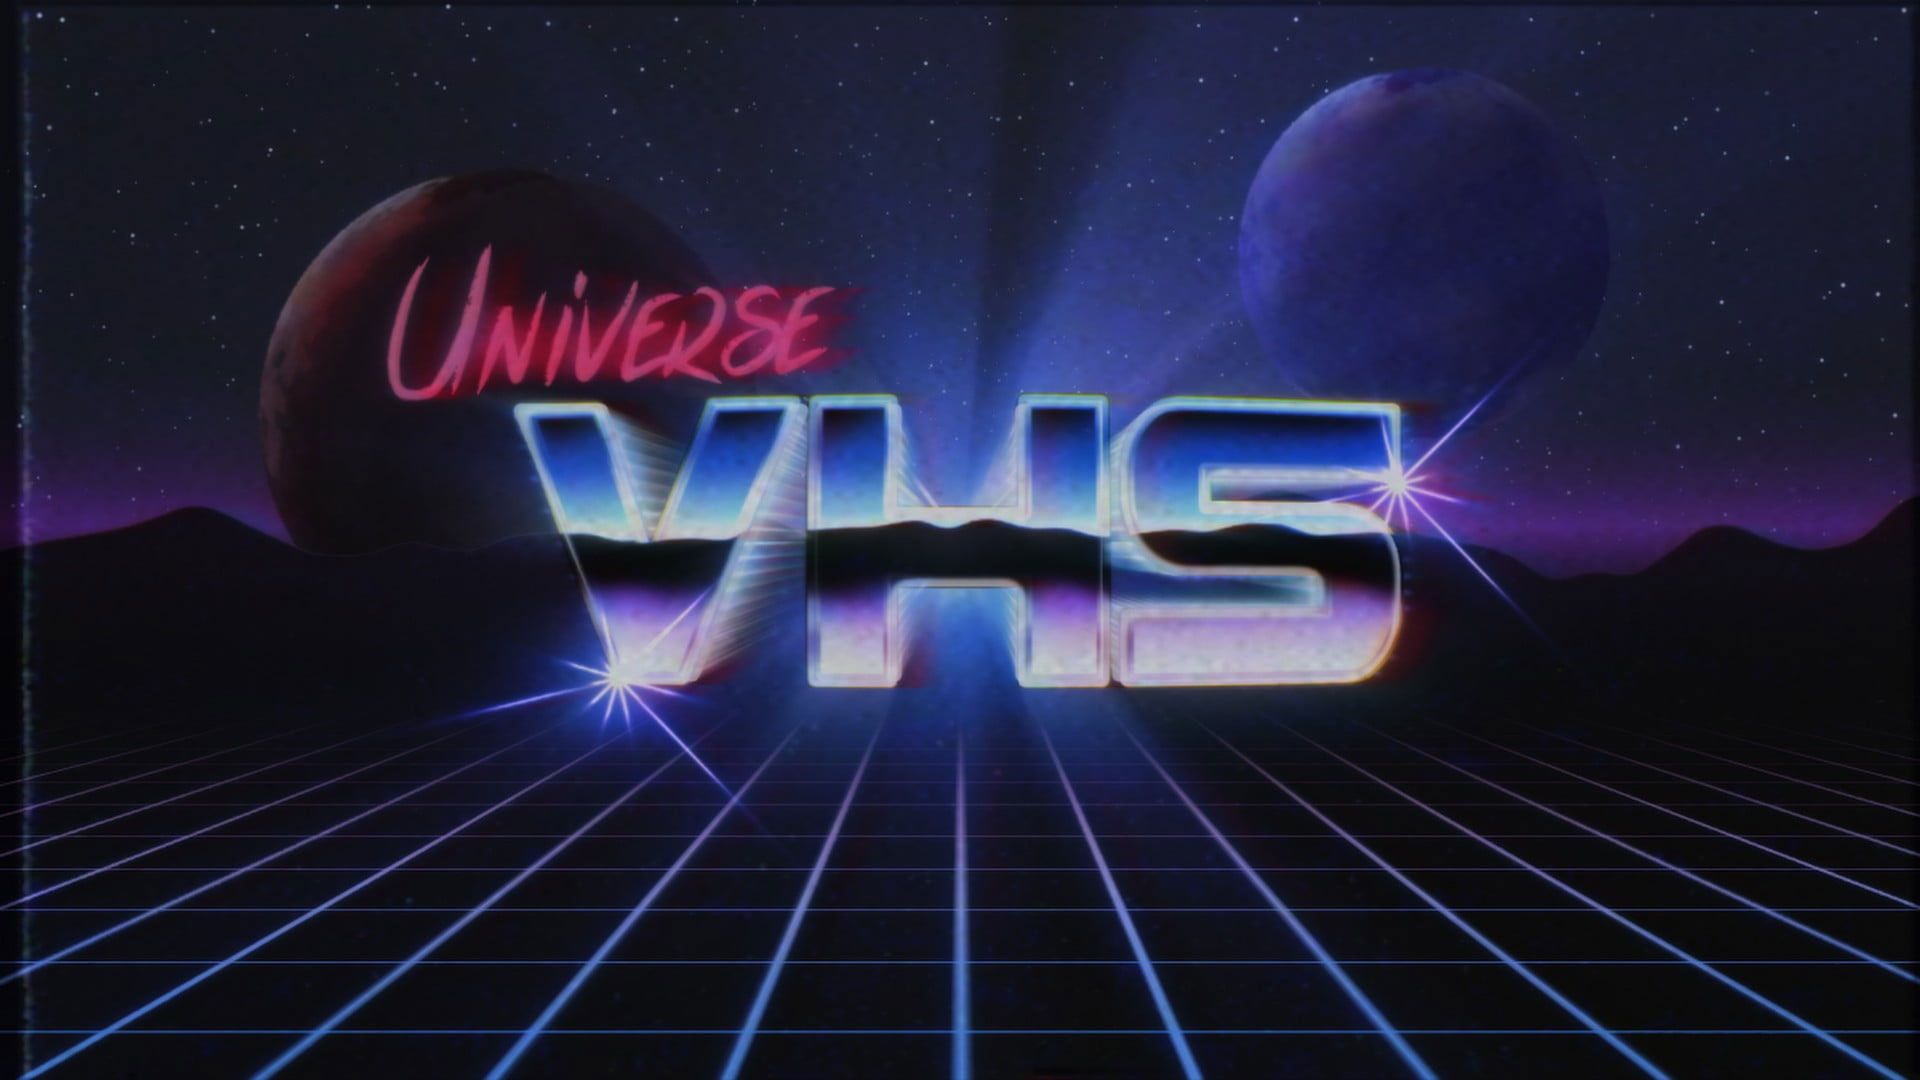 A 1980s-style video logo for the Universe VHS - VHS